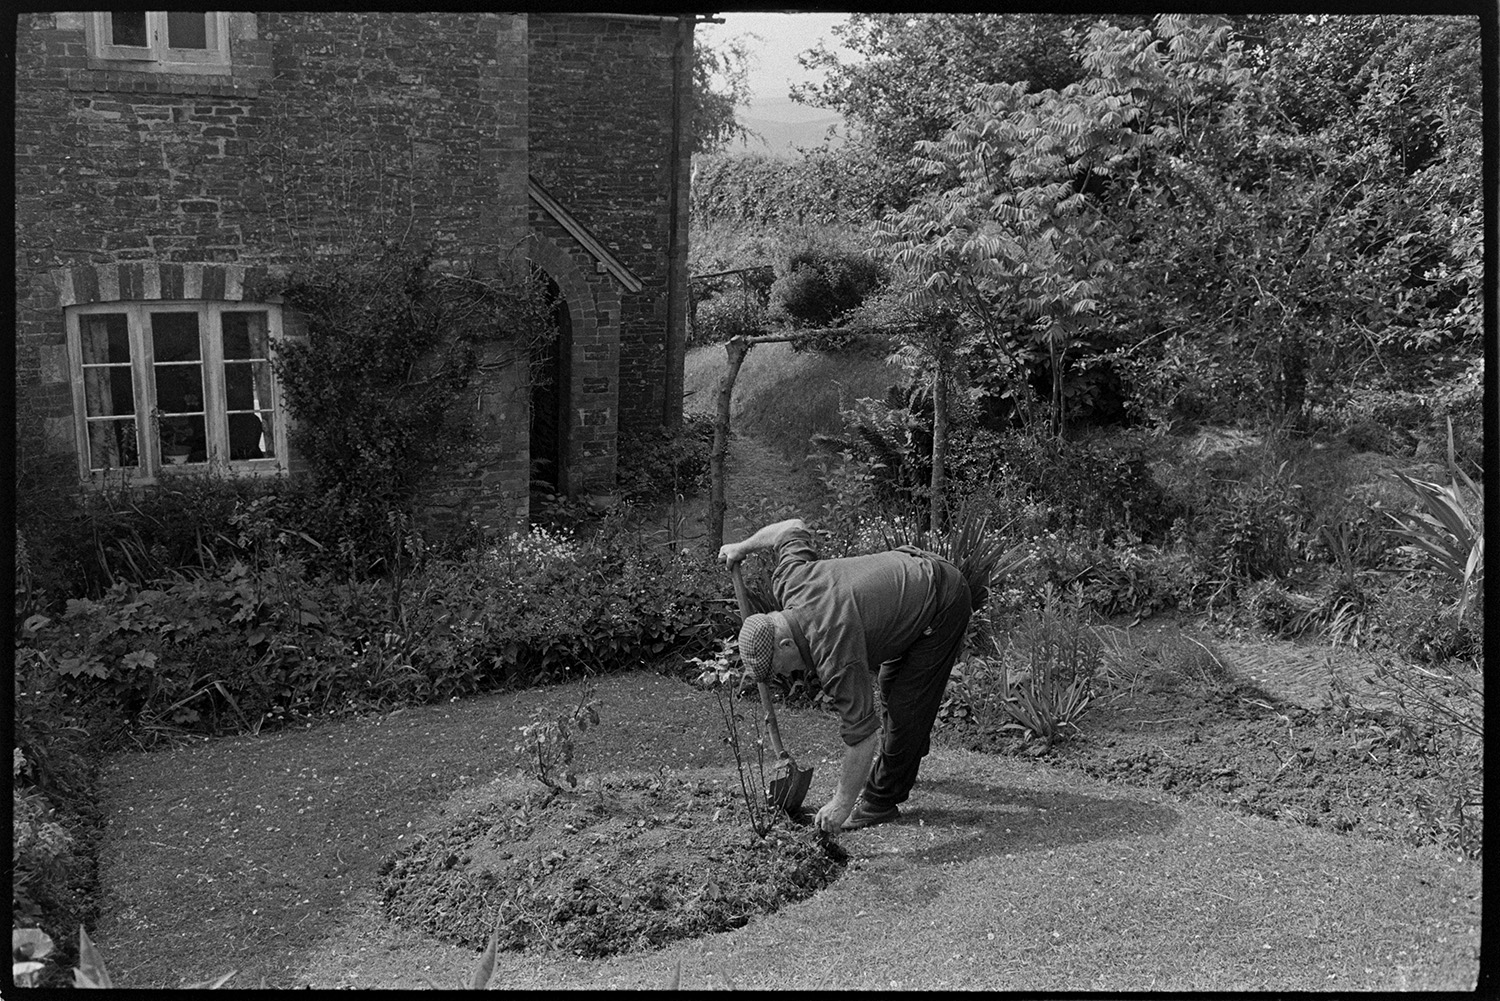 Man gardening, edging lawn. 
[A man using a Devon spade to trim the edge of a lawn in a garden at Wordens Cottages, Kingscott. He is working around a circular flower bed in the centre of the lawn. A stone cottage, trees and cobbled path can be seen in the background.]